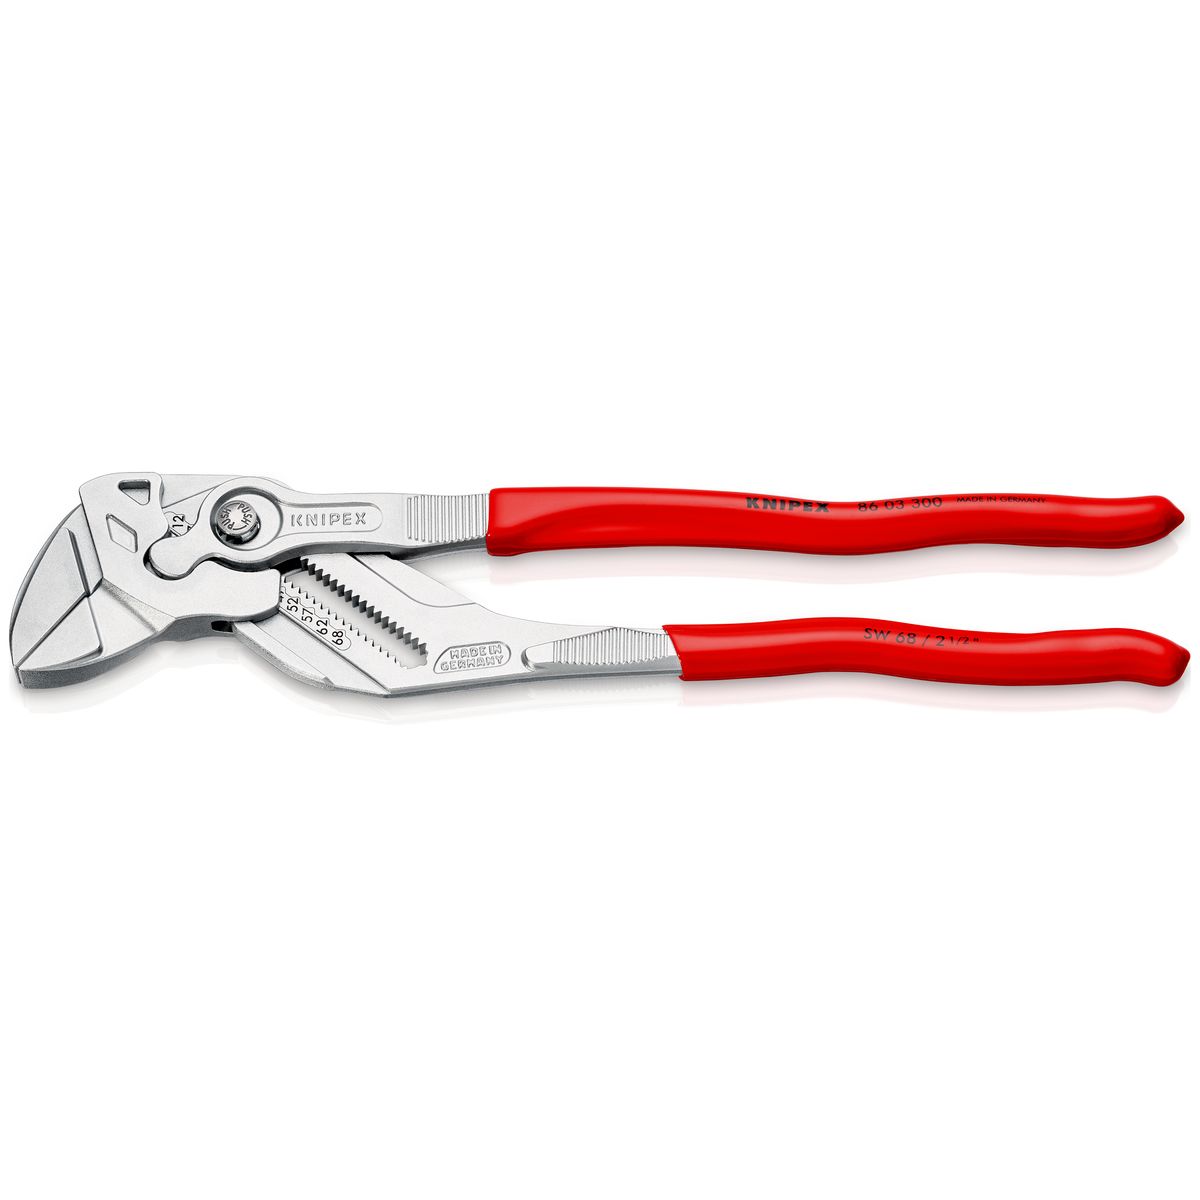 PLIER WRENCHES 8603300 Knipex